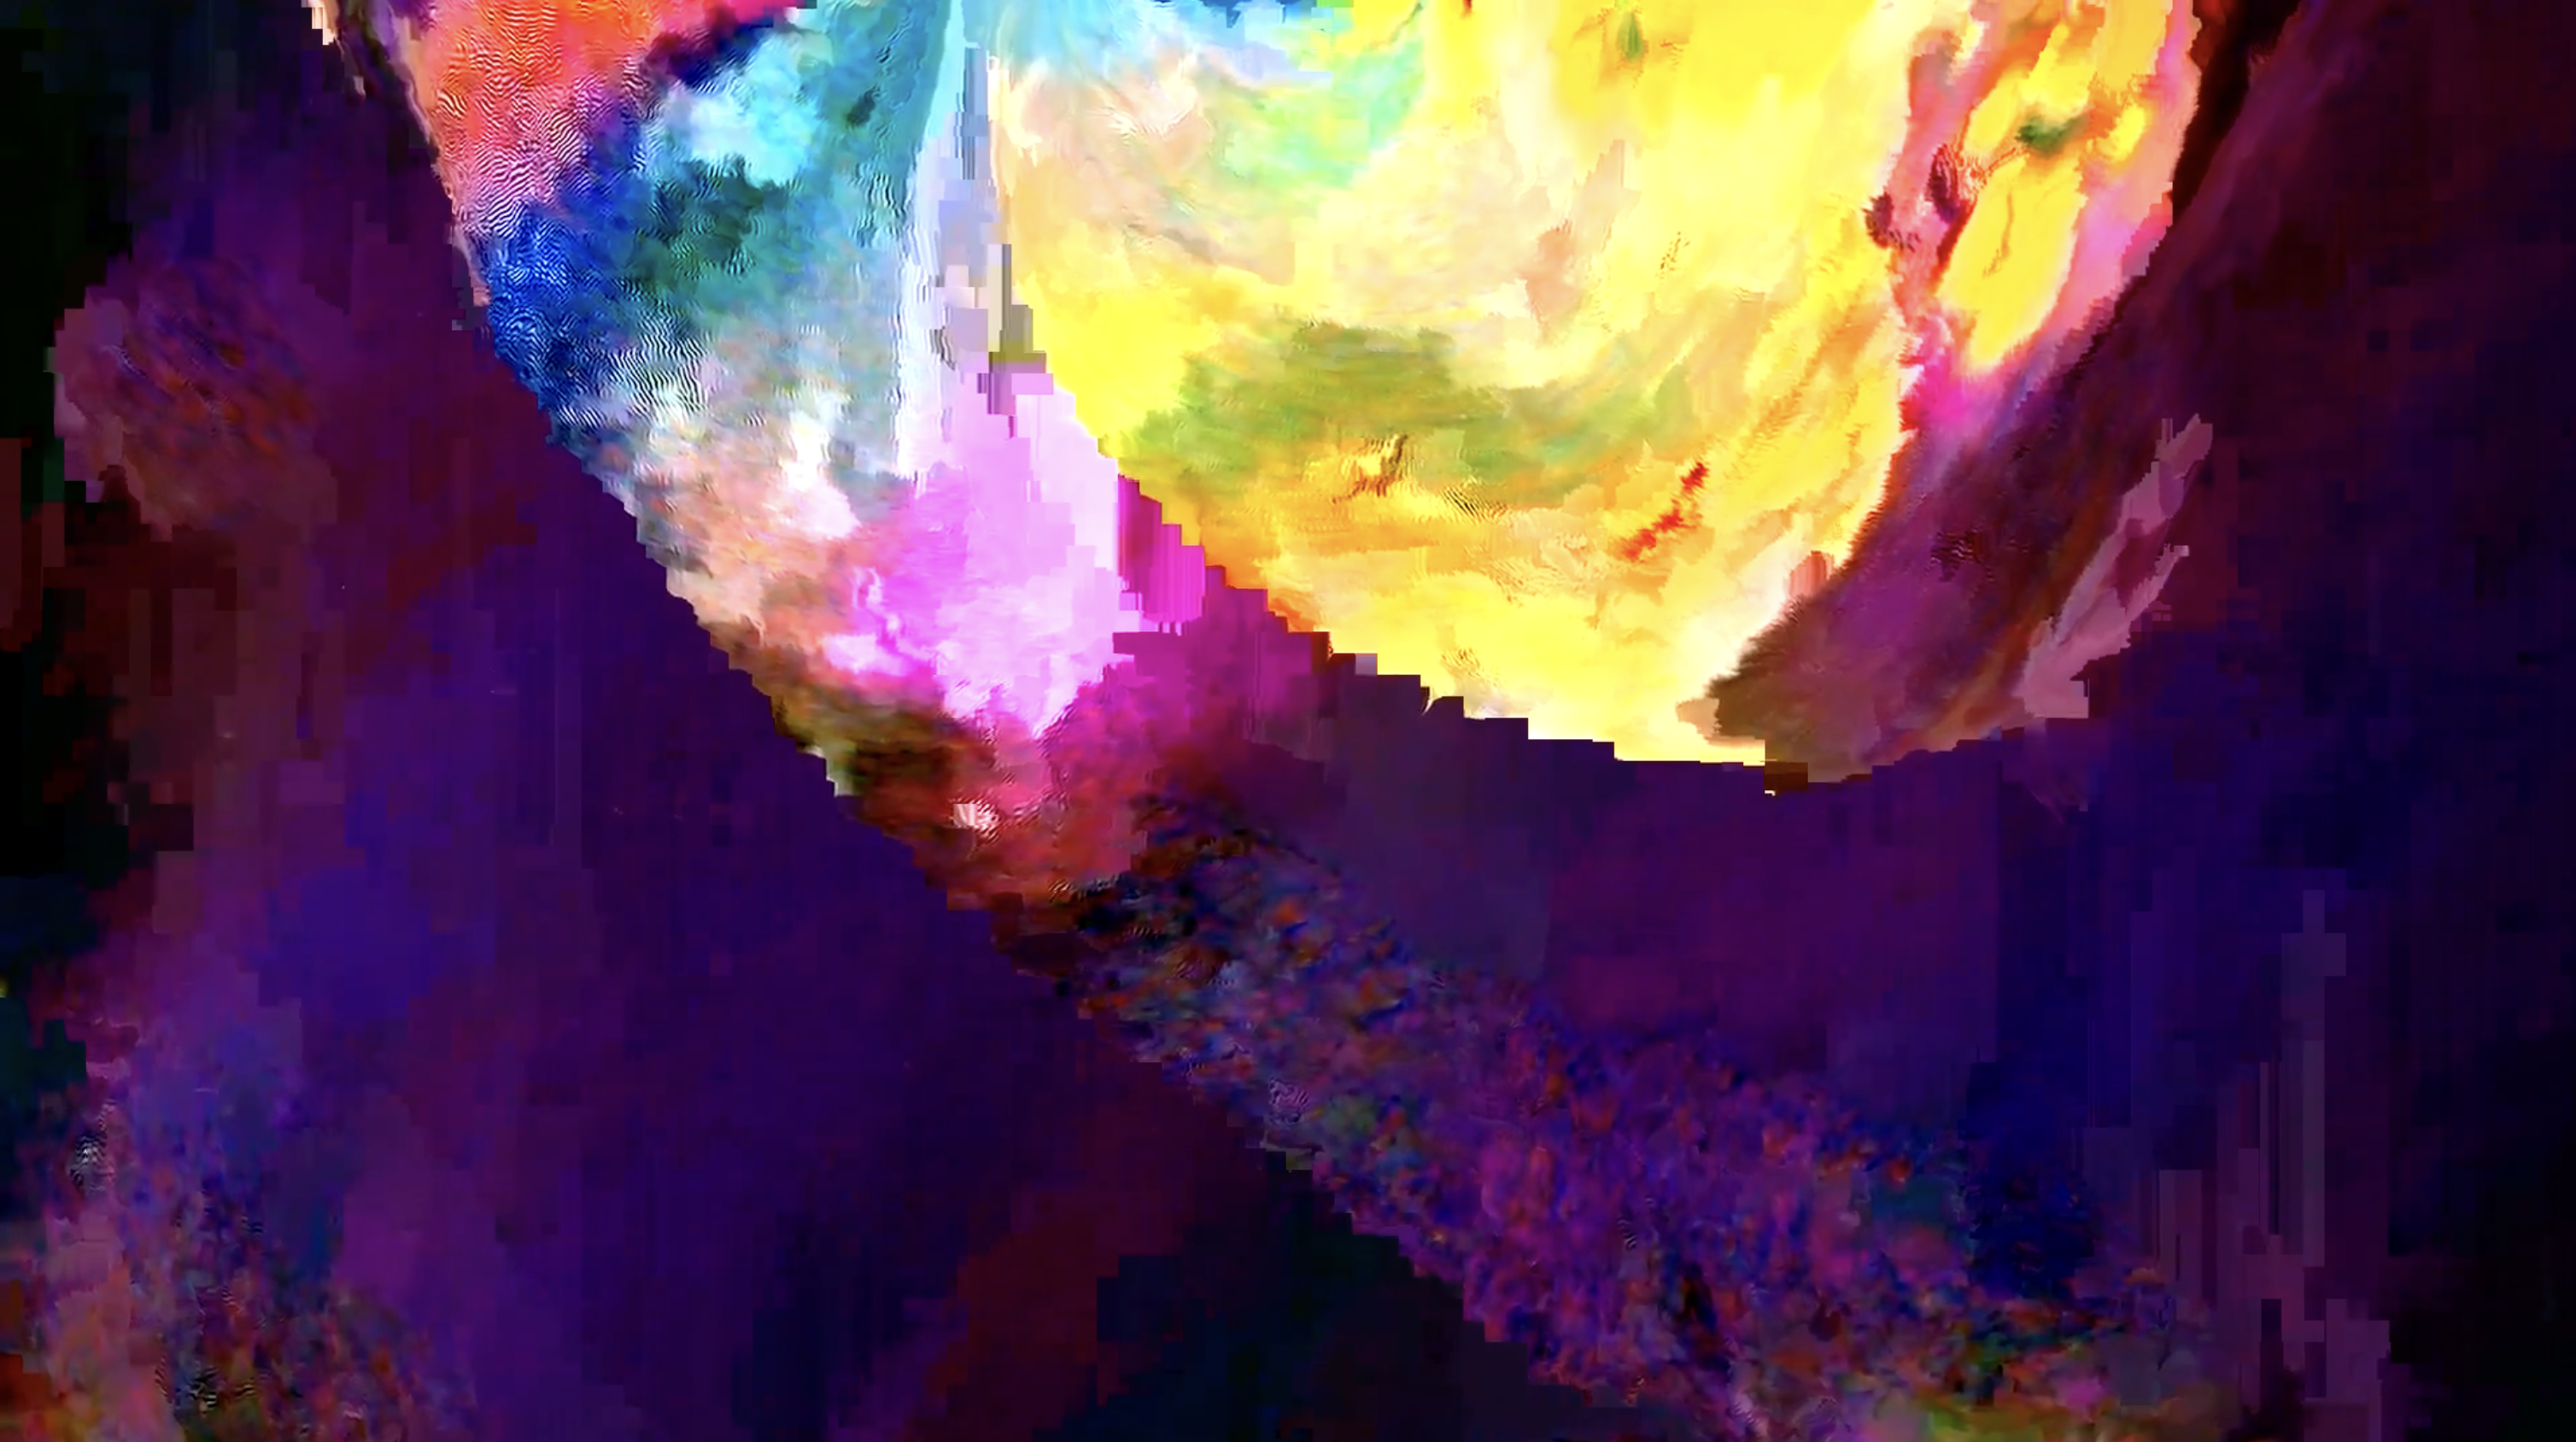 Single frame from descendence, a piece by mip using only Compressure on a single source